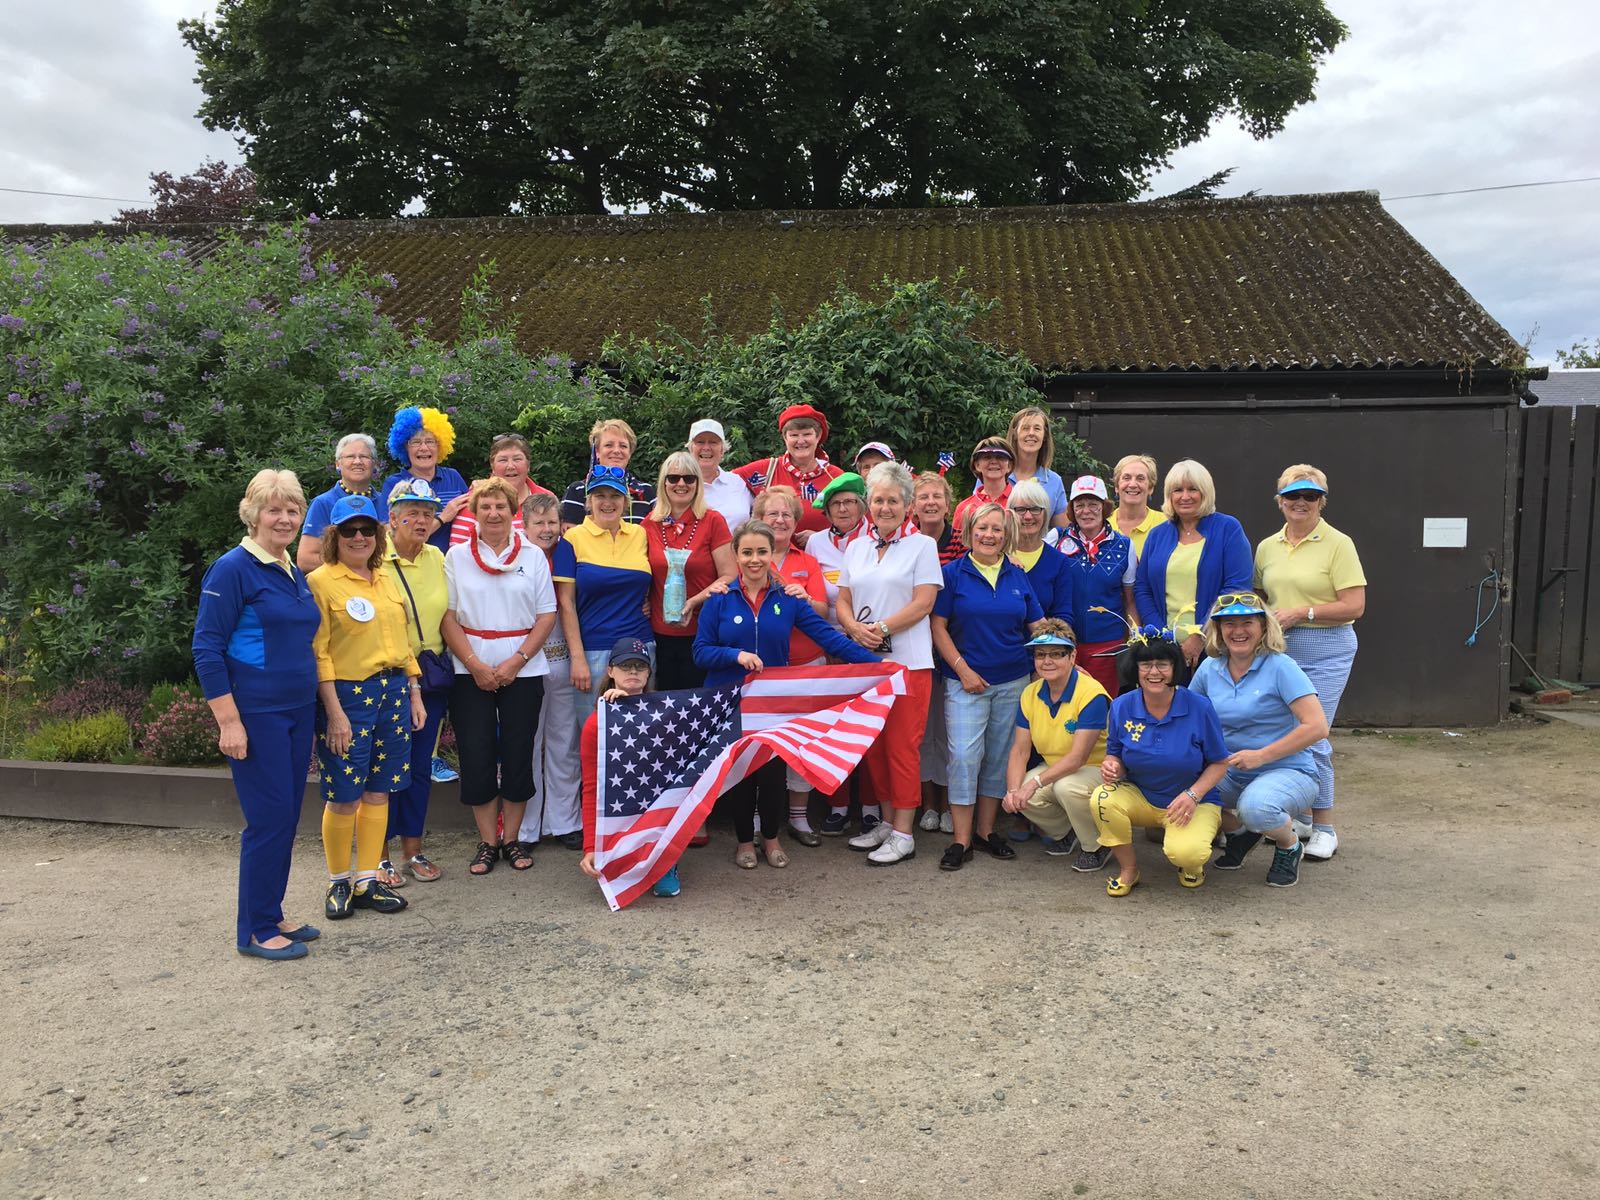 Tryst Ladies Solheim Cup Day- All bright and colourful